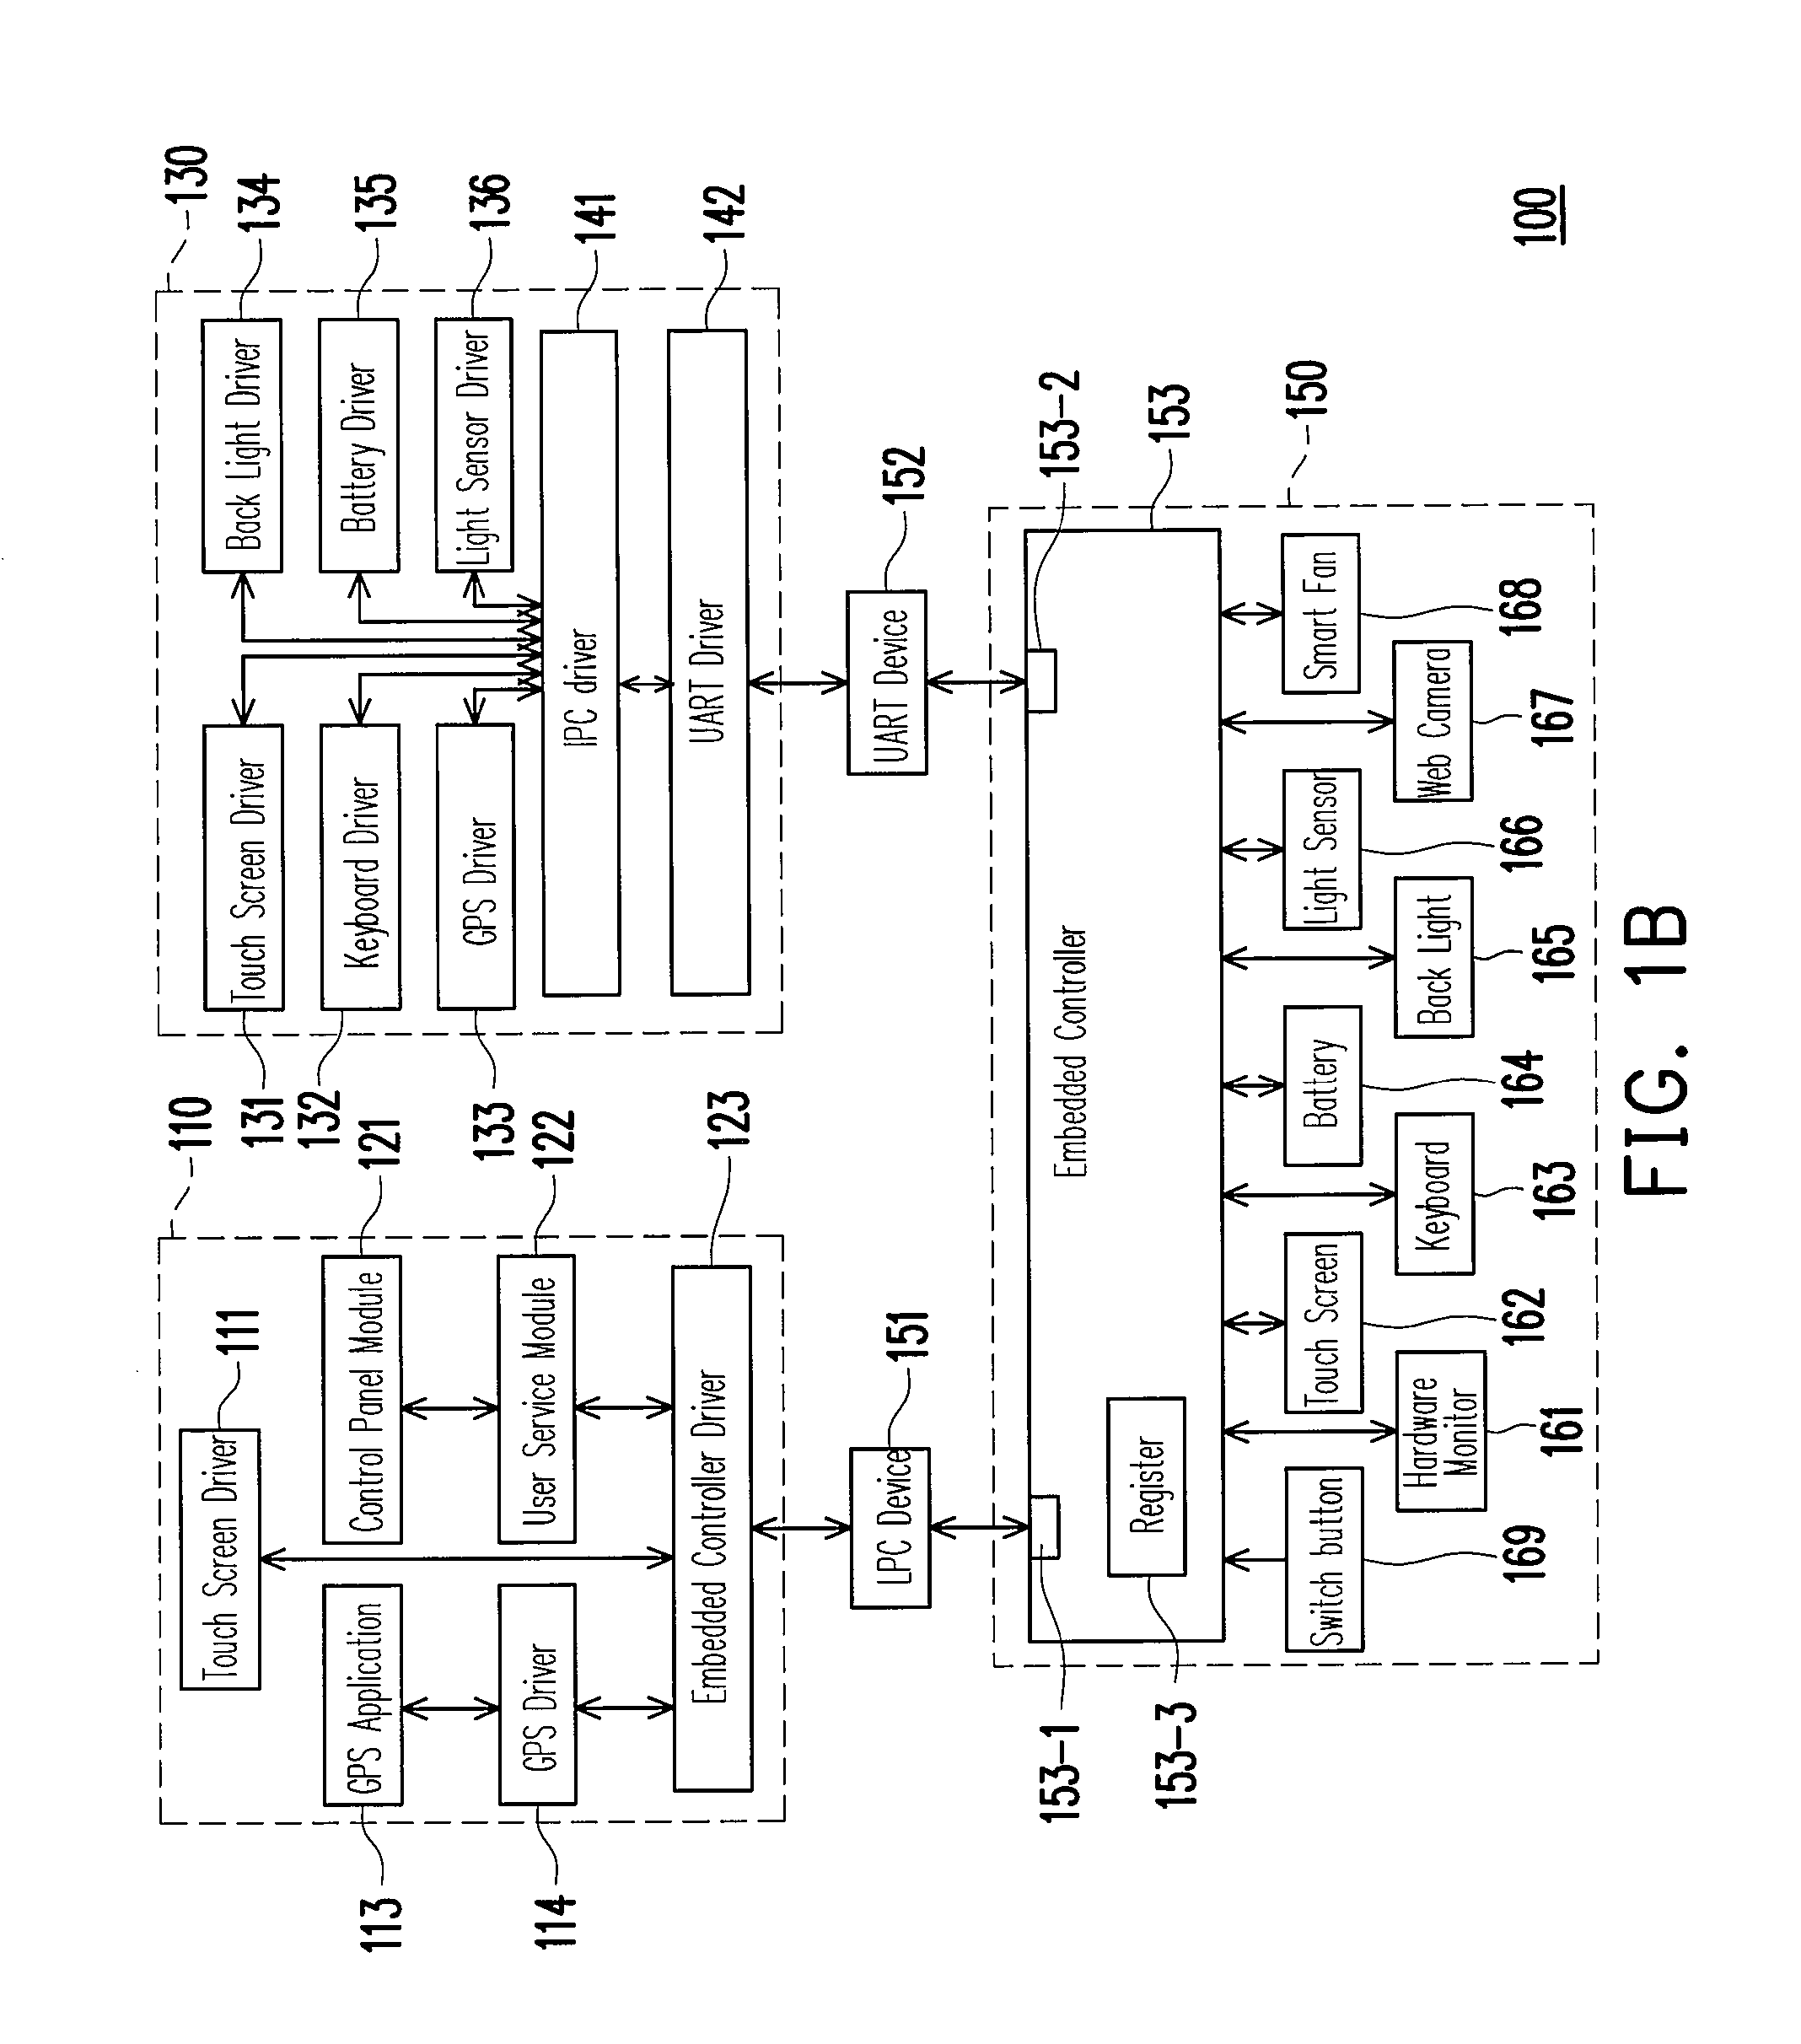 Mobile device with two operating systems and method for sharing hardware device between two operating systems thereof